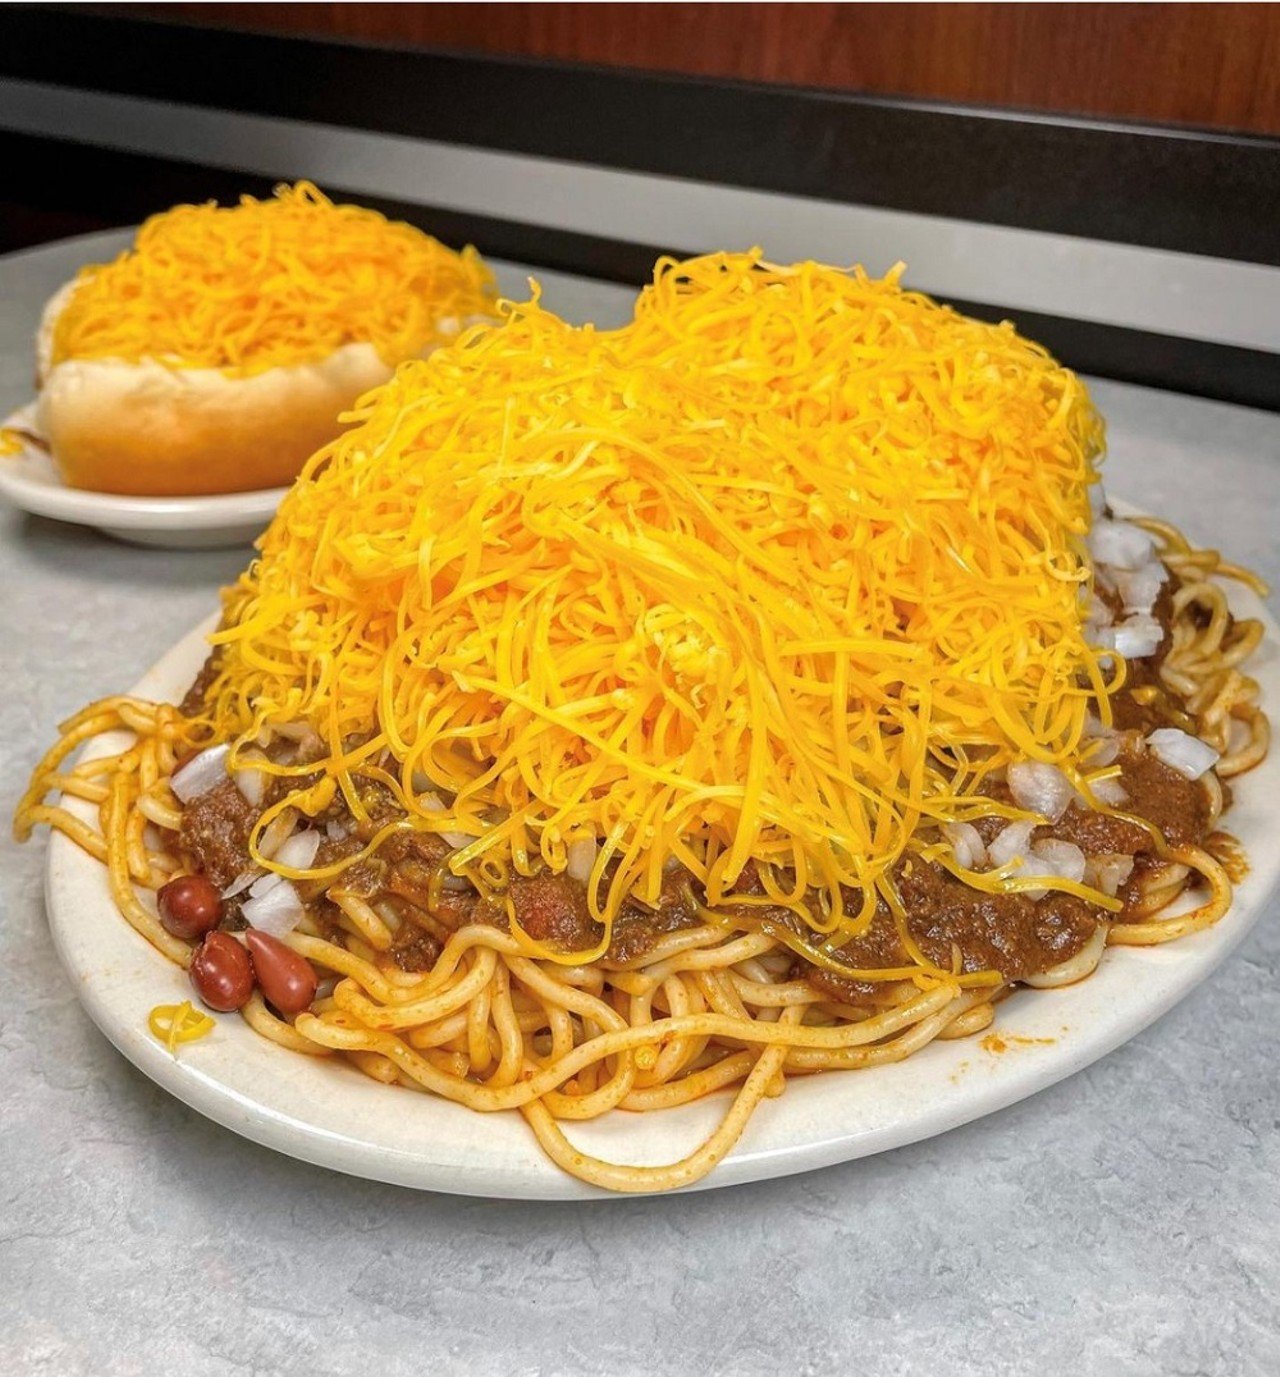 Skyline Chili
Multiple Locations
Skyline has been one of the pioneers of Cincinnati chili since opening in 1949. First founded by Greek immigrants, the chili parlor pours the Queen City staple over spaghetti or hot dogs and tops it with a mound of cheese, oyster crackers and — depending on your taste preference — onions and beans. Also available are chili burritos, fries and vegetarian chili, which is made with black beans and rice.